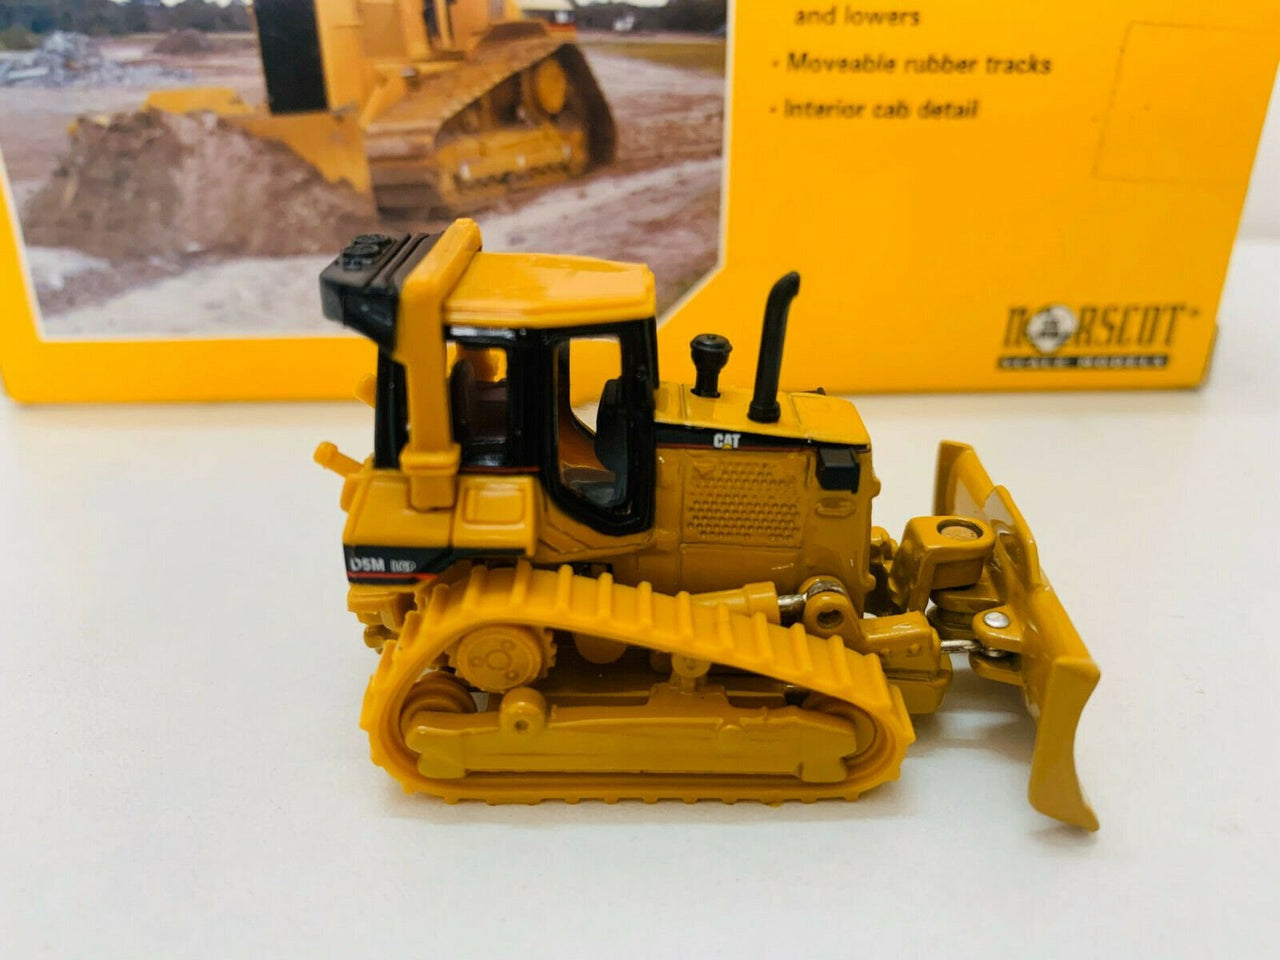 55108 Caterpillar D5M Crawler Tractor Scale 1:87 (Discontinued Model)